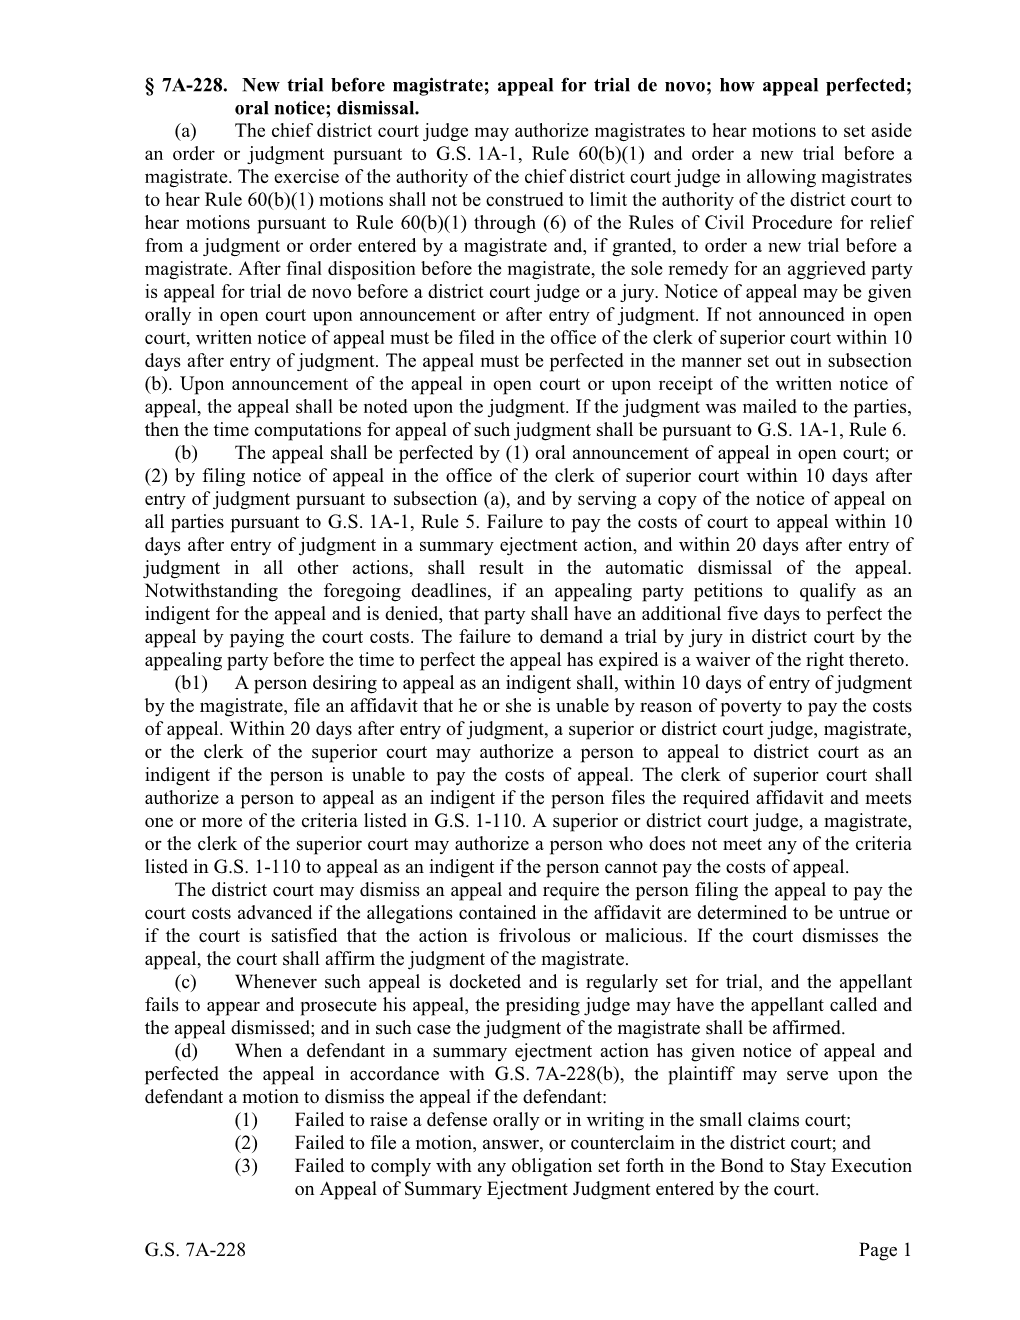 GS 7A-228 Page 1 § 7A-228. New Trial Before Magistrate